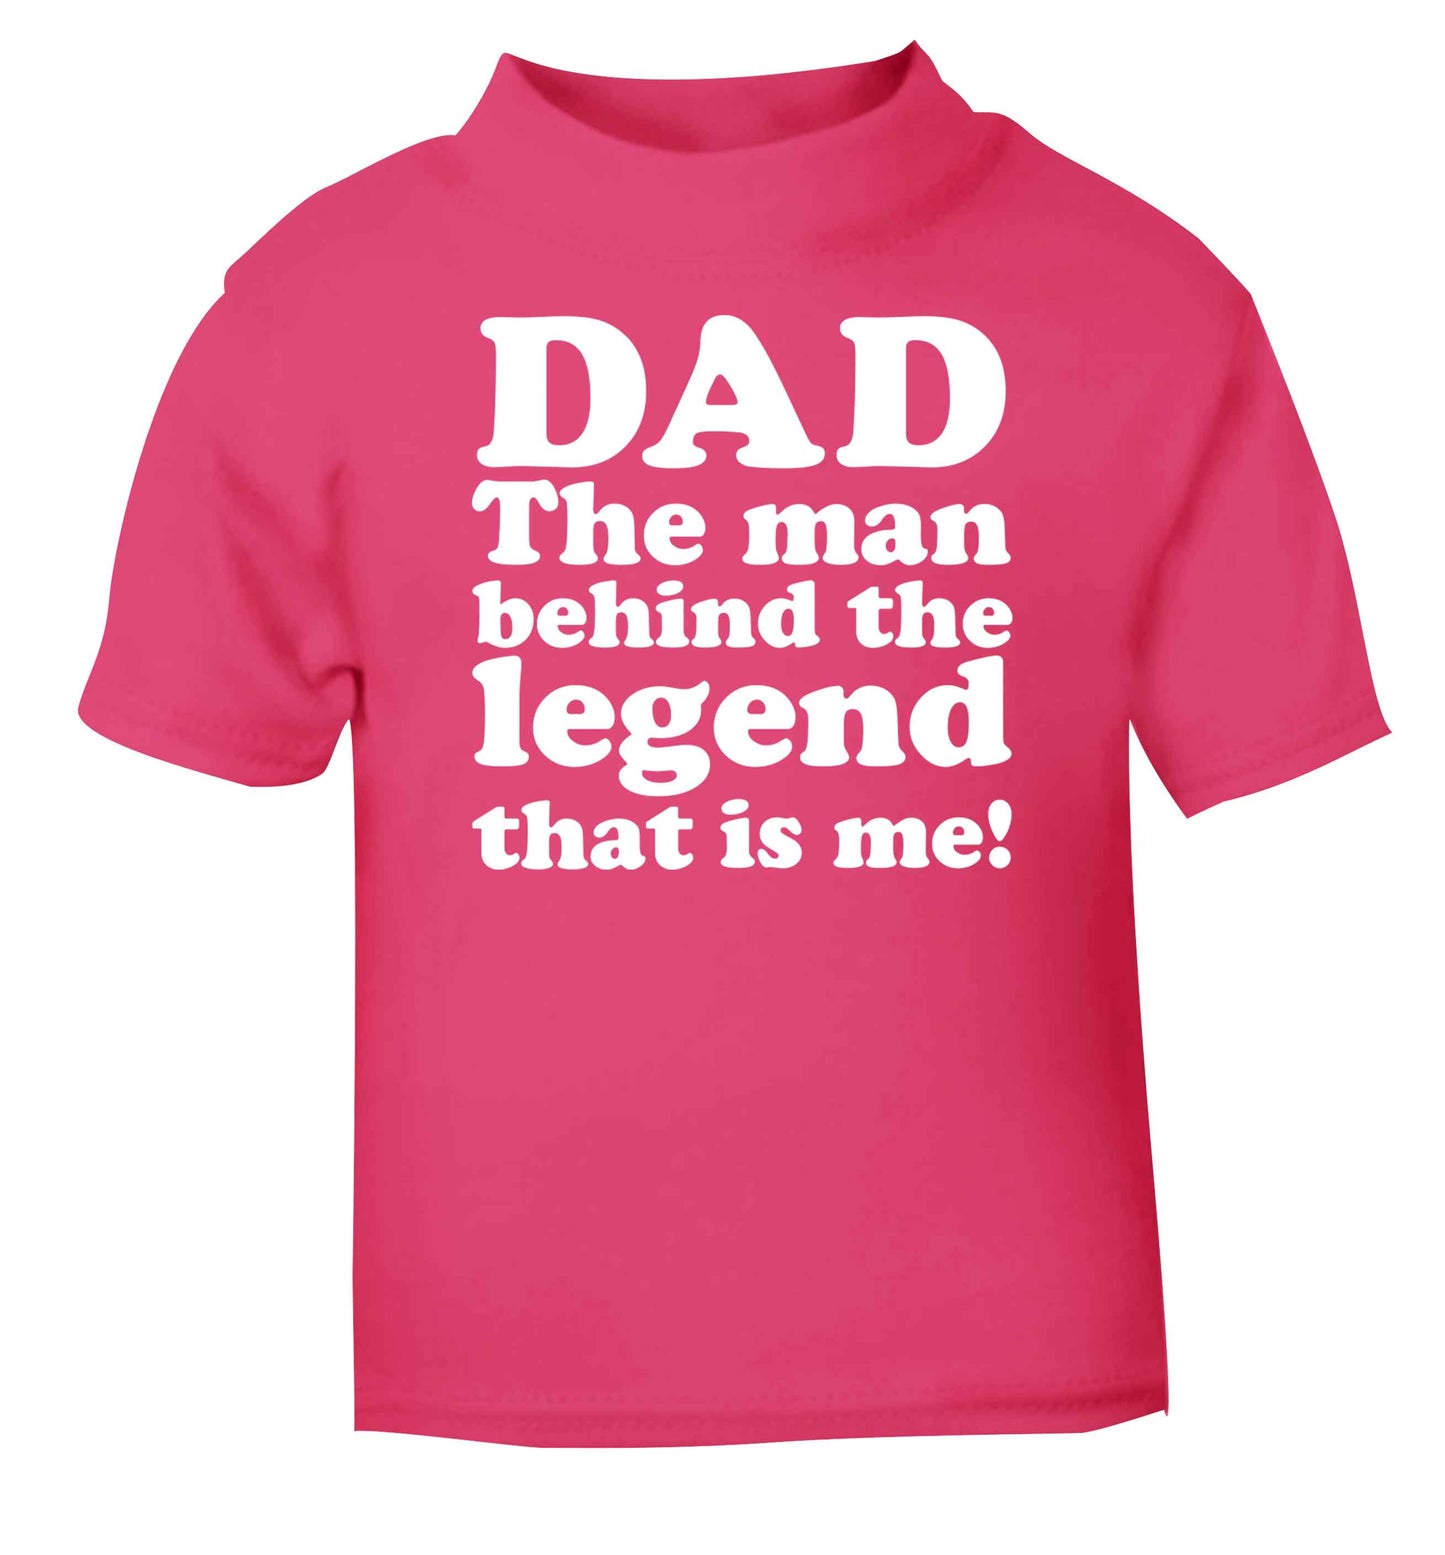 Dad the man behind the legend that is me pink baby toddler Tshirt 2 Years